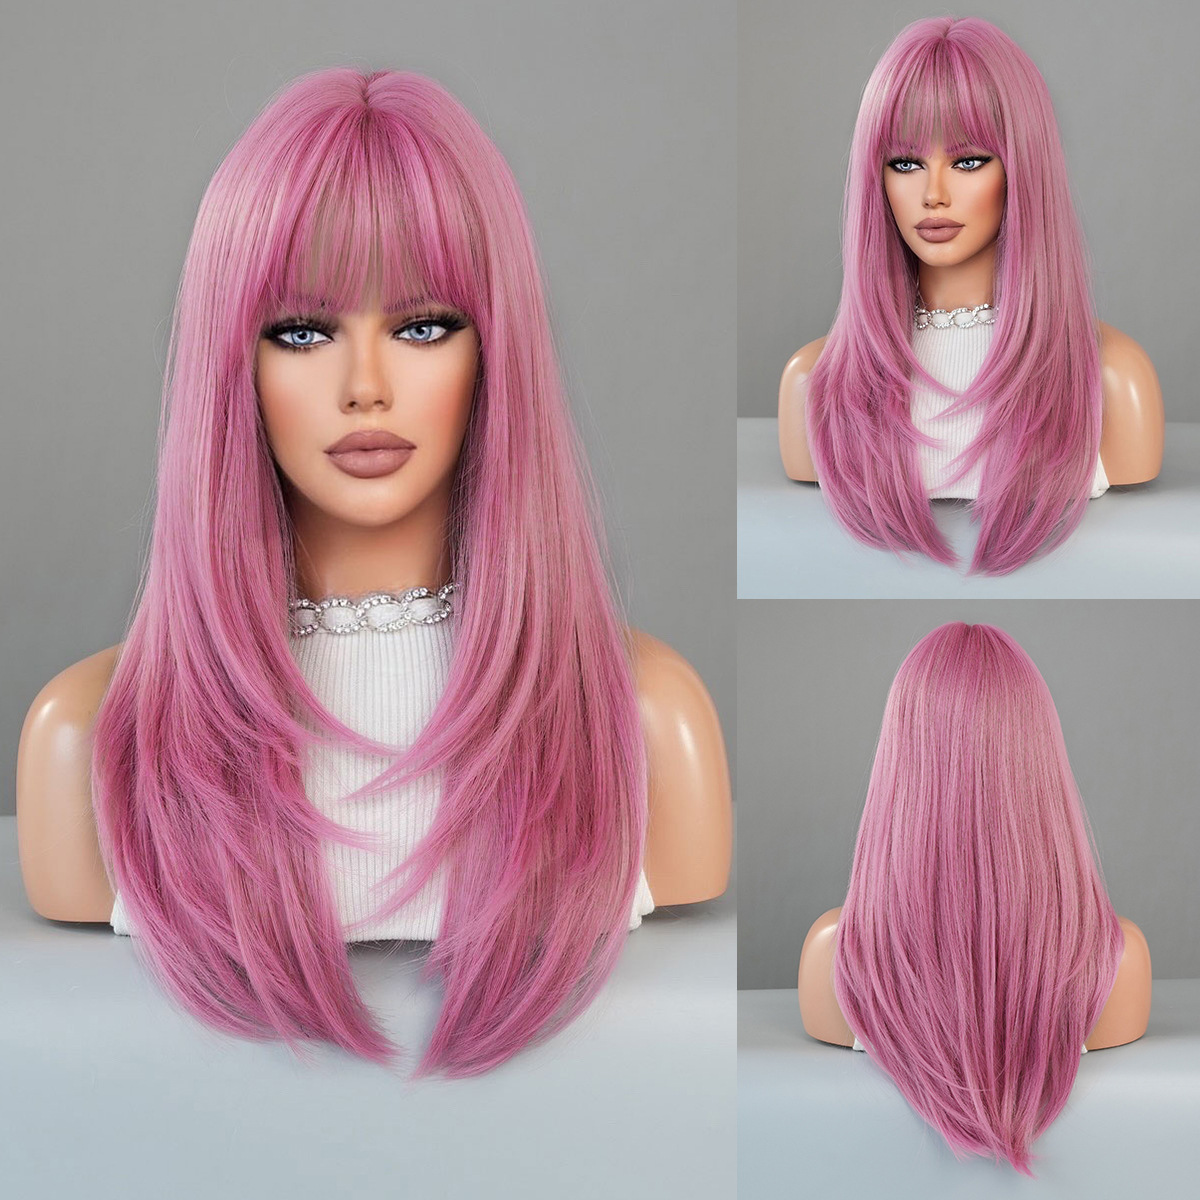 A synthetic wig with vibrant multicolor long curly hair and airy bangs, ready for use